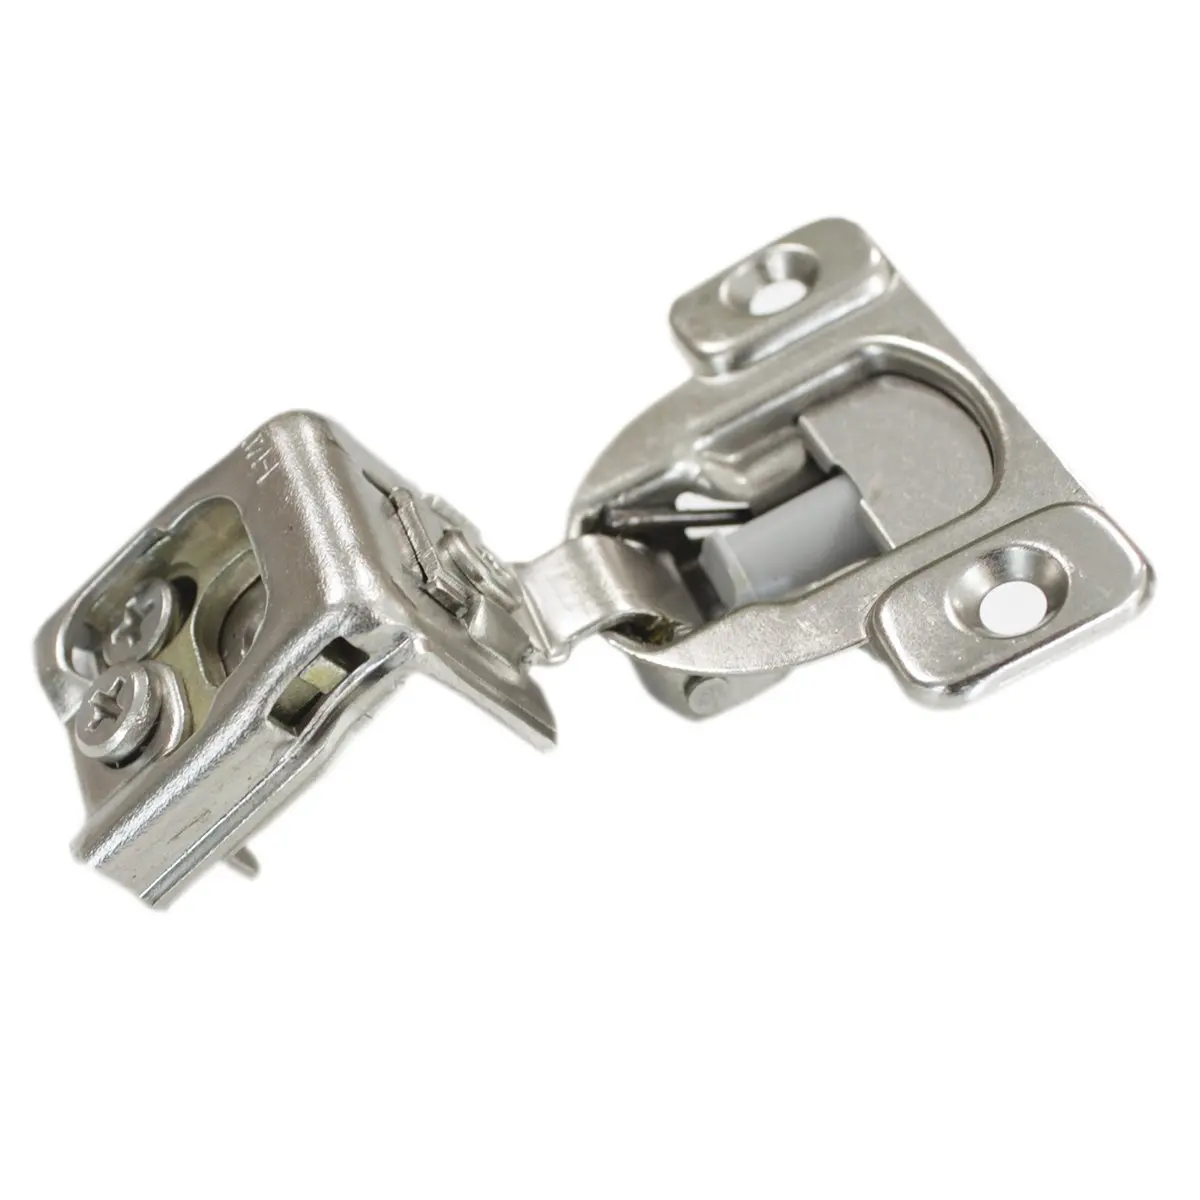 full overlay cabinet hinges soft close